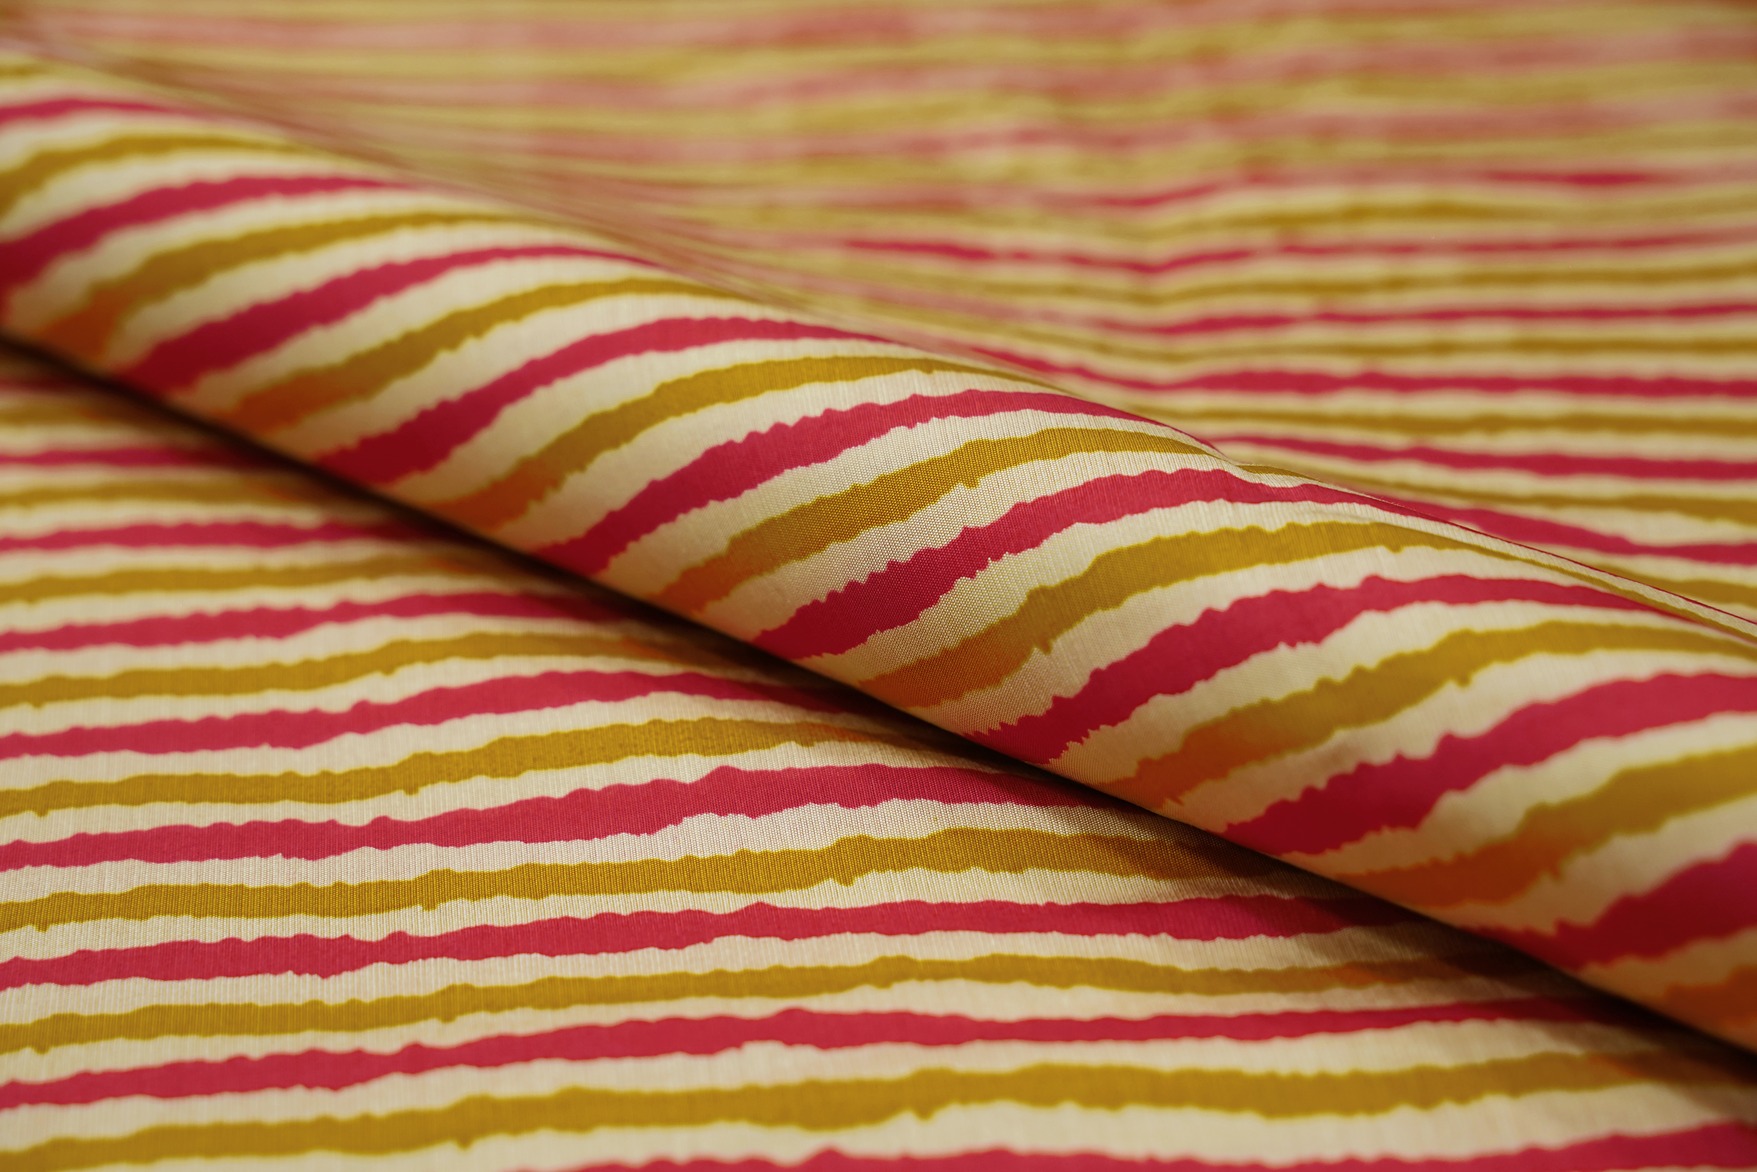 CRIMSON RED & TURMERIC YELLOW COLOR ABSTRACT STRIPES PATTERN MUSLIN SILK PRINT 10132